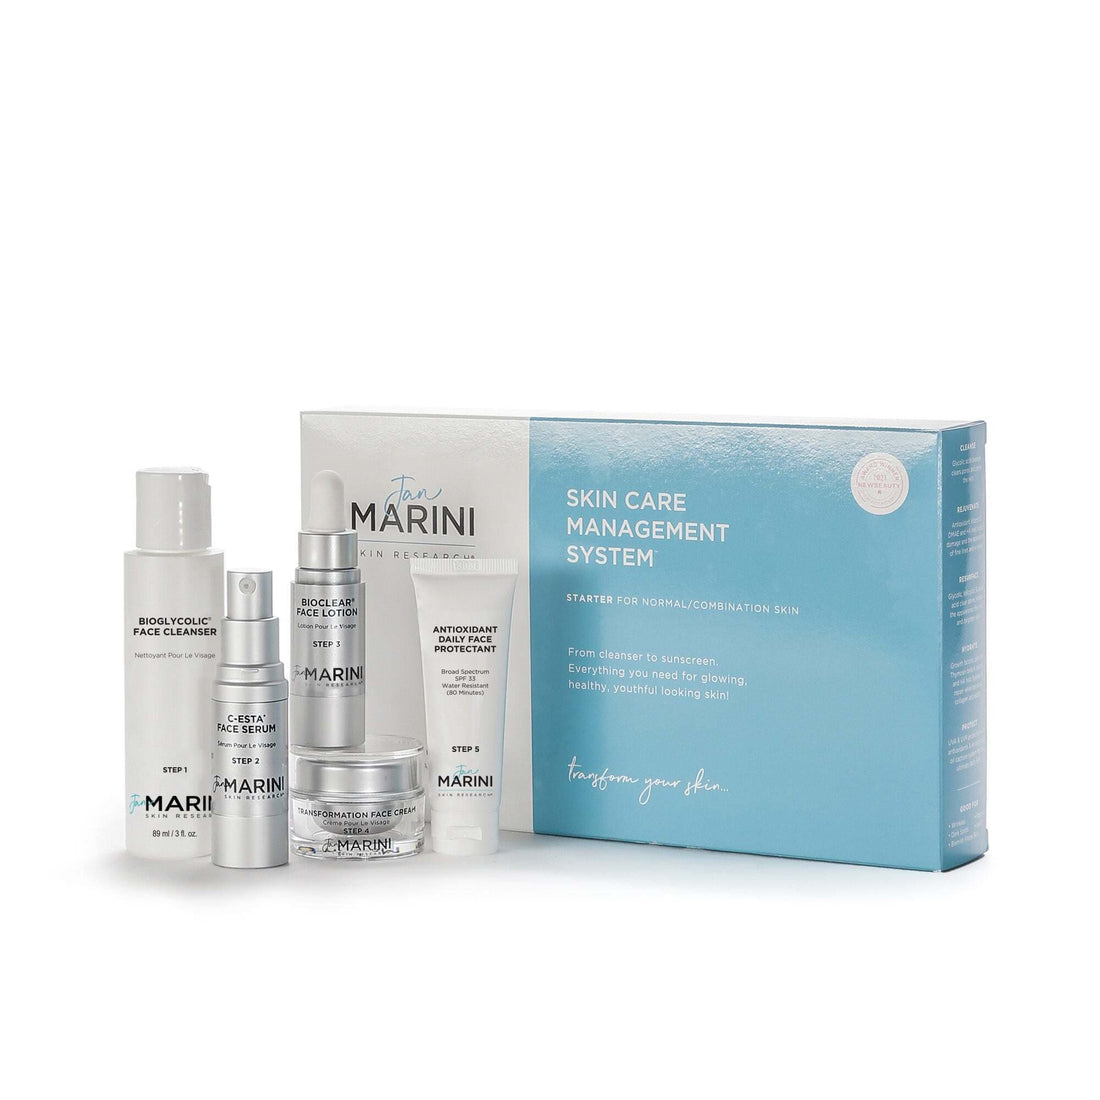 Jan Marini Starter Skincare Management System-Normal/Combination with Antioxidant Daily Face Protectant SPF 33